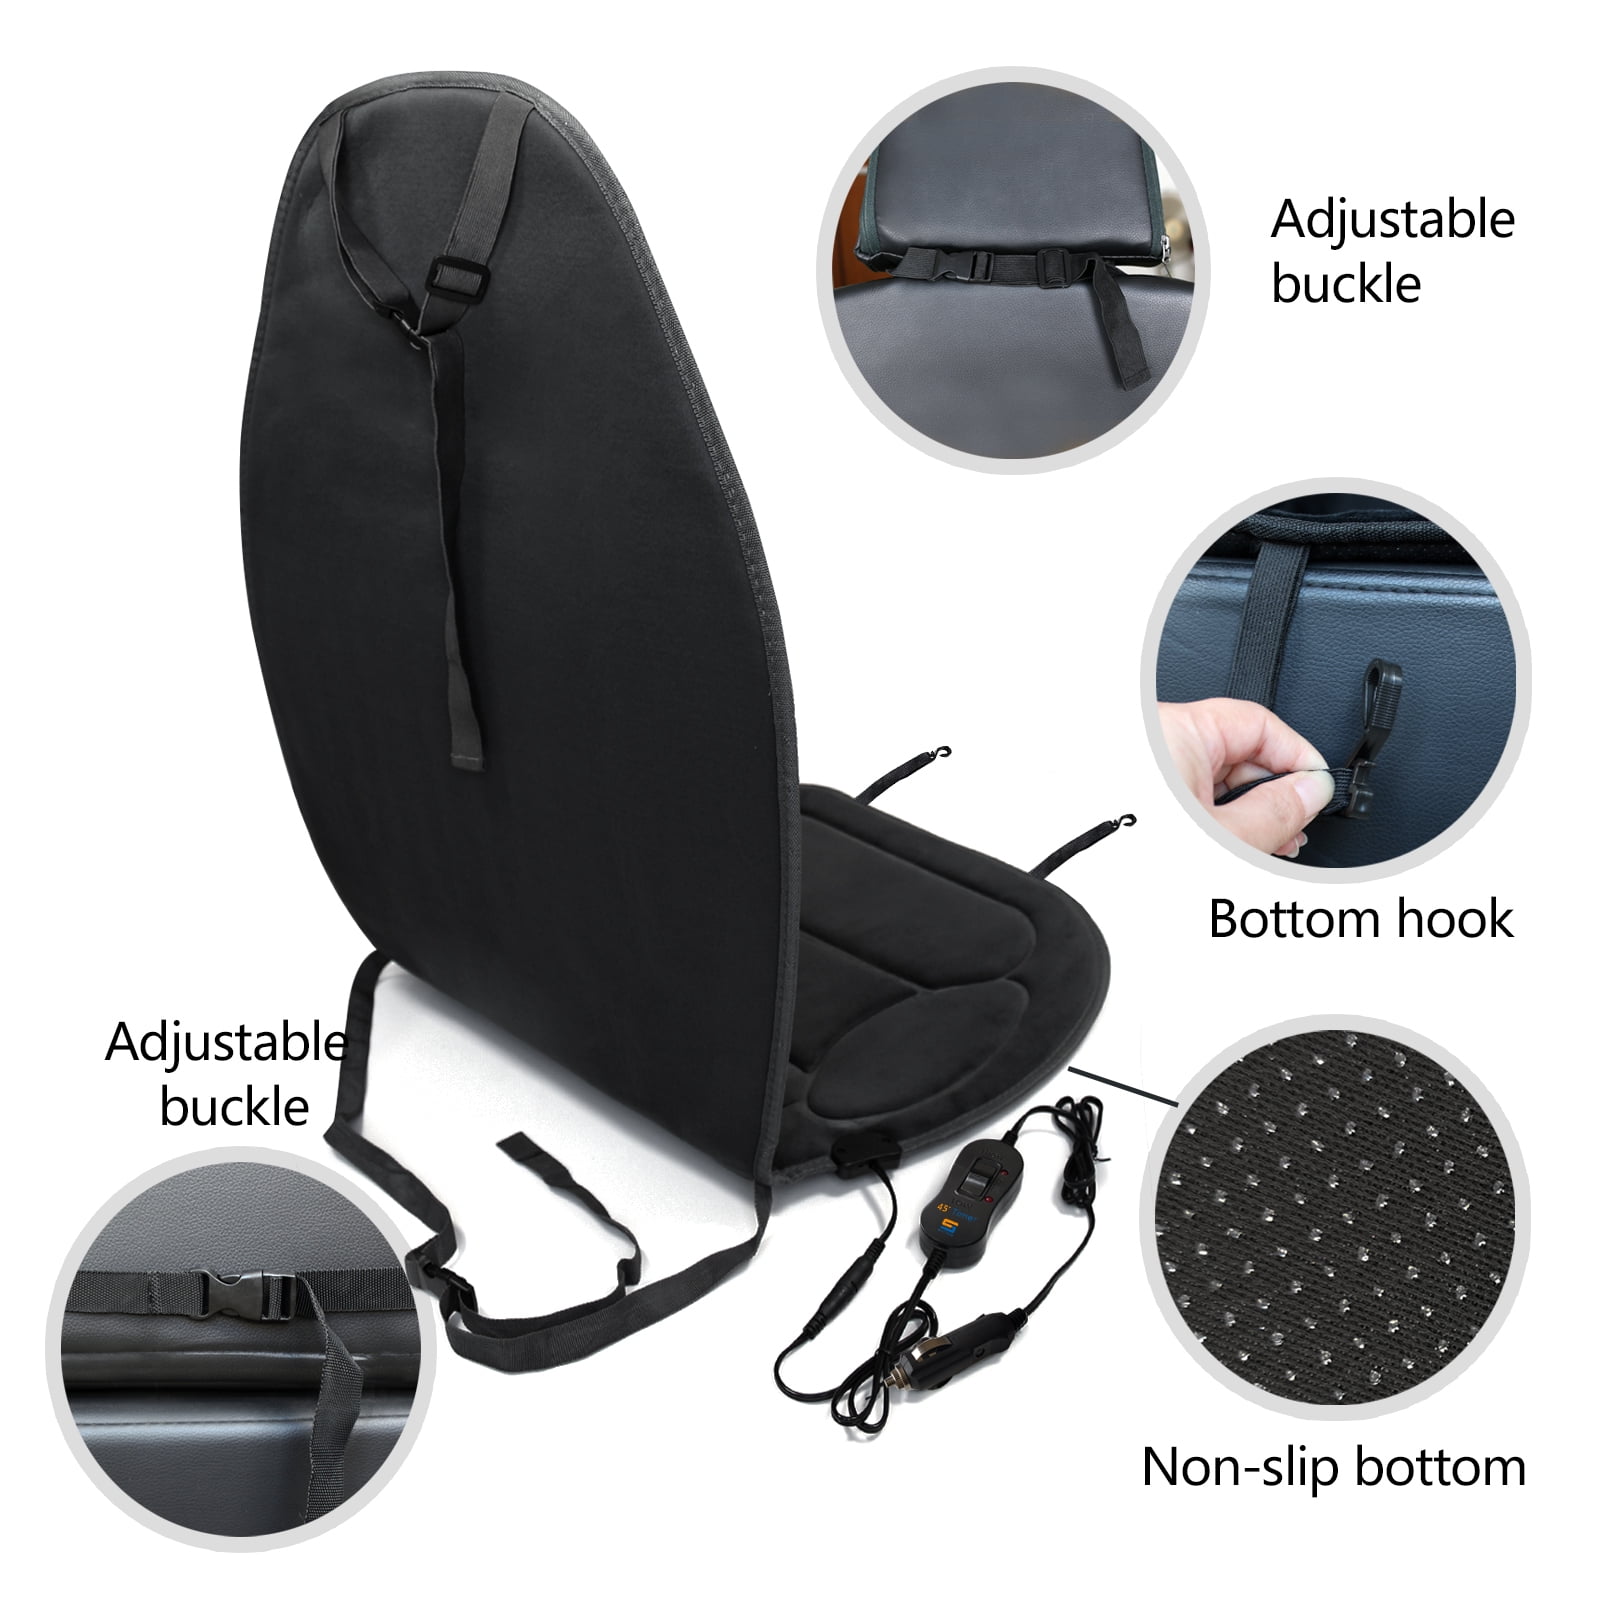 Sojoy Universal Auto Warmer Heating Pad Car Seat Cushion Cover for